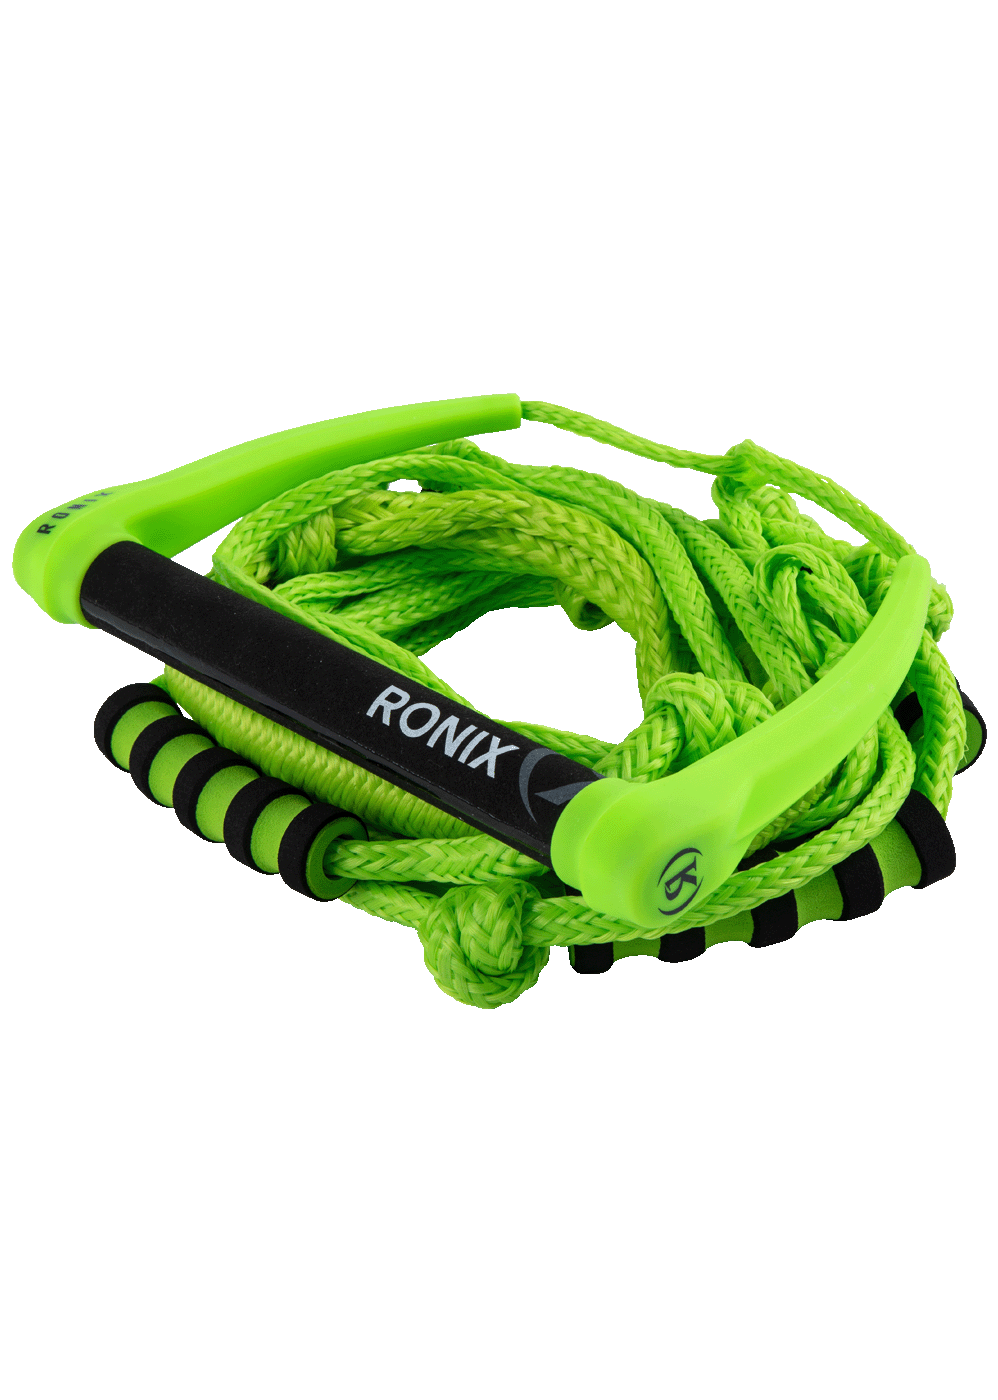 SURF-ROPE-GREEN-3-4 copy